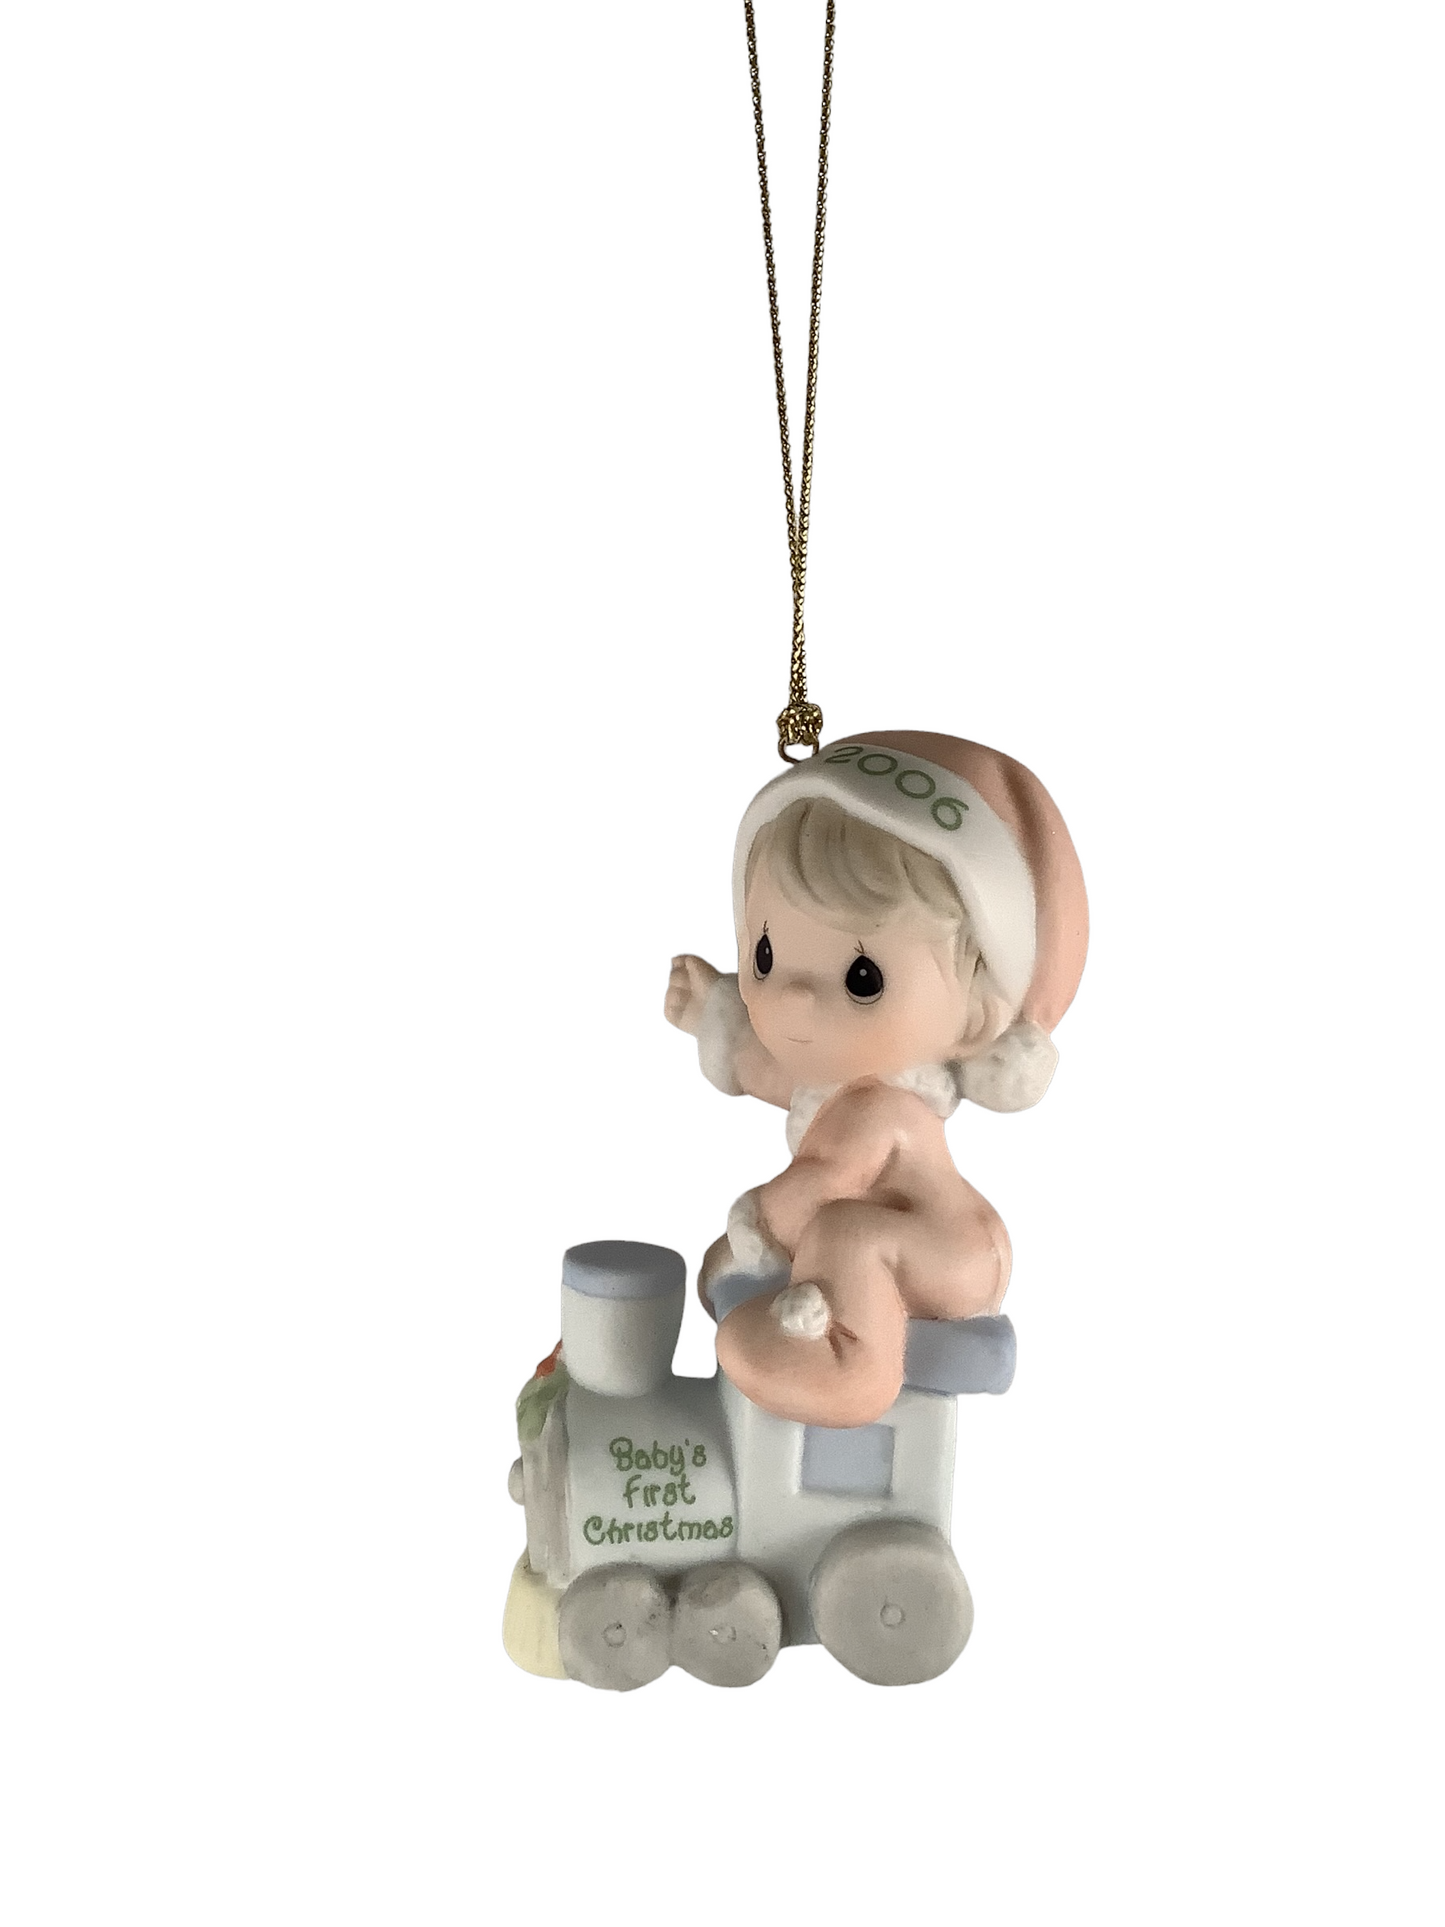 Baby's First Christmas 2006 (Boy) - Precious Moment Ornament 